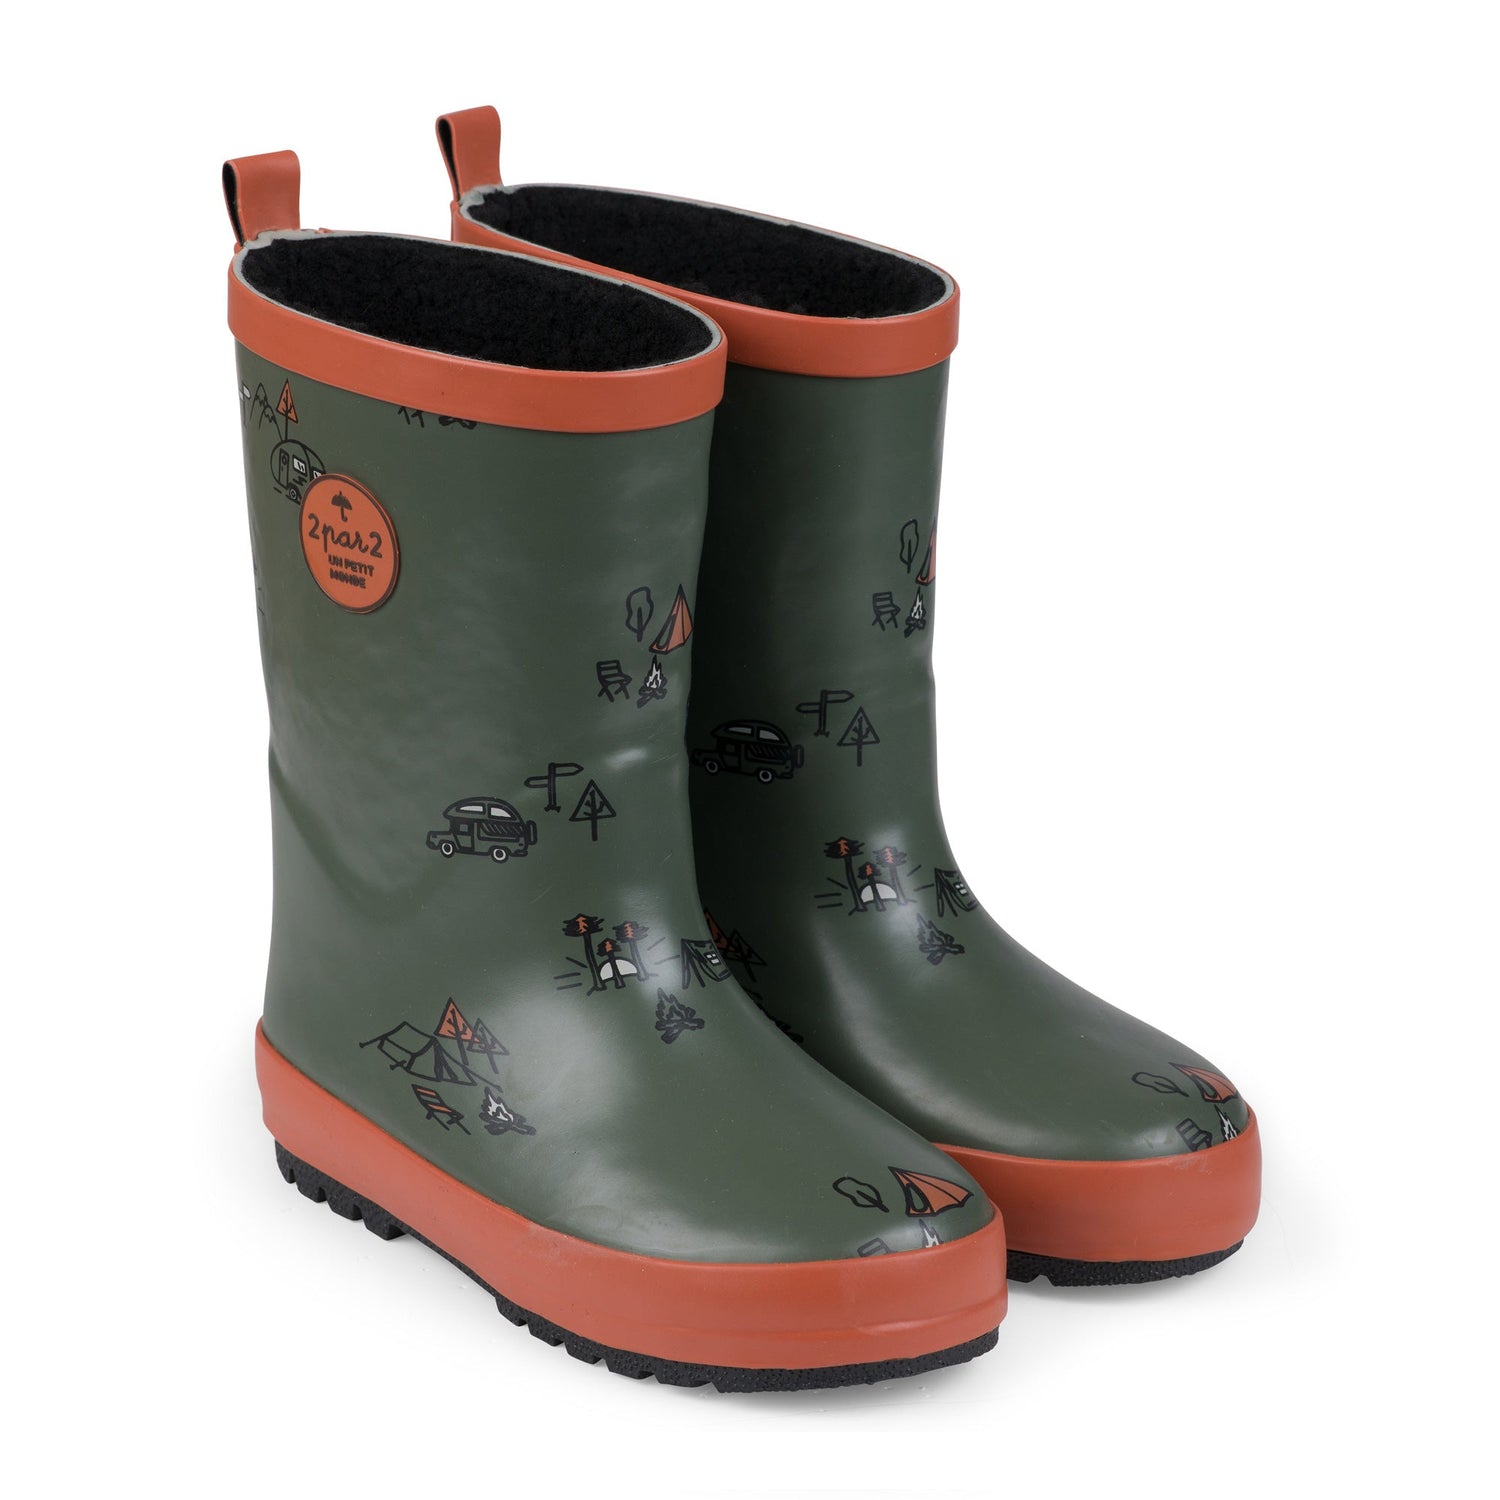 Printed Rain Boots Lined With Fine Plush Khaki Green Camping Boy D30WB_010